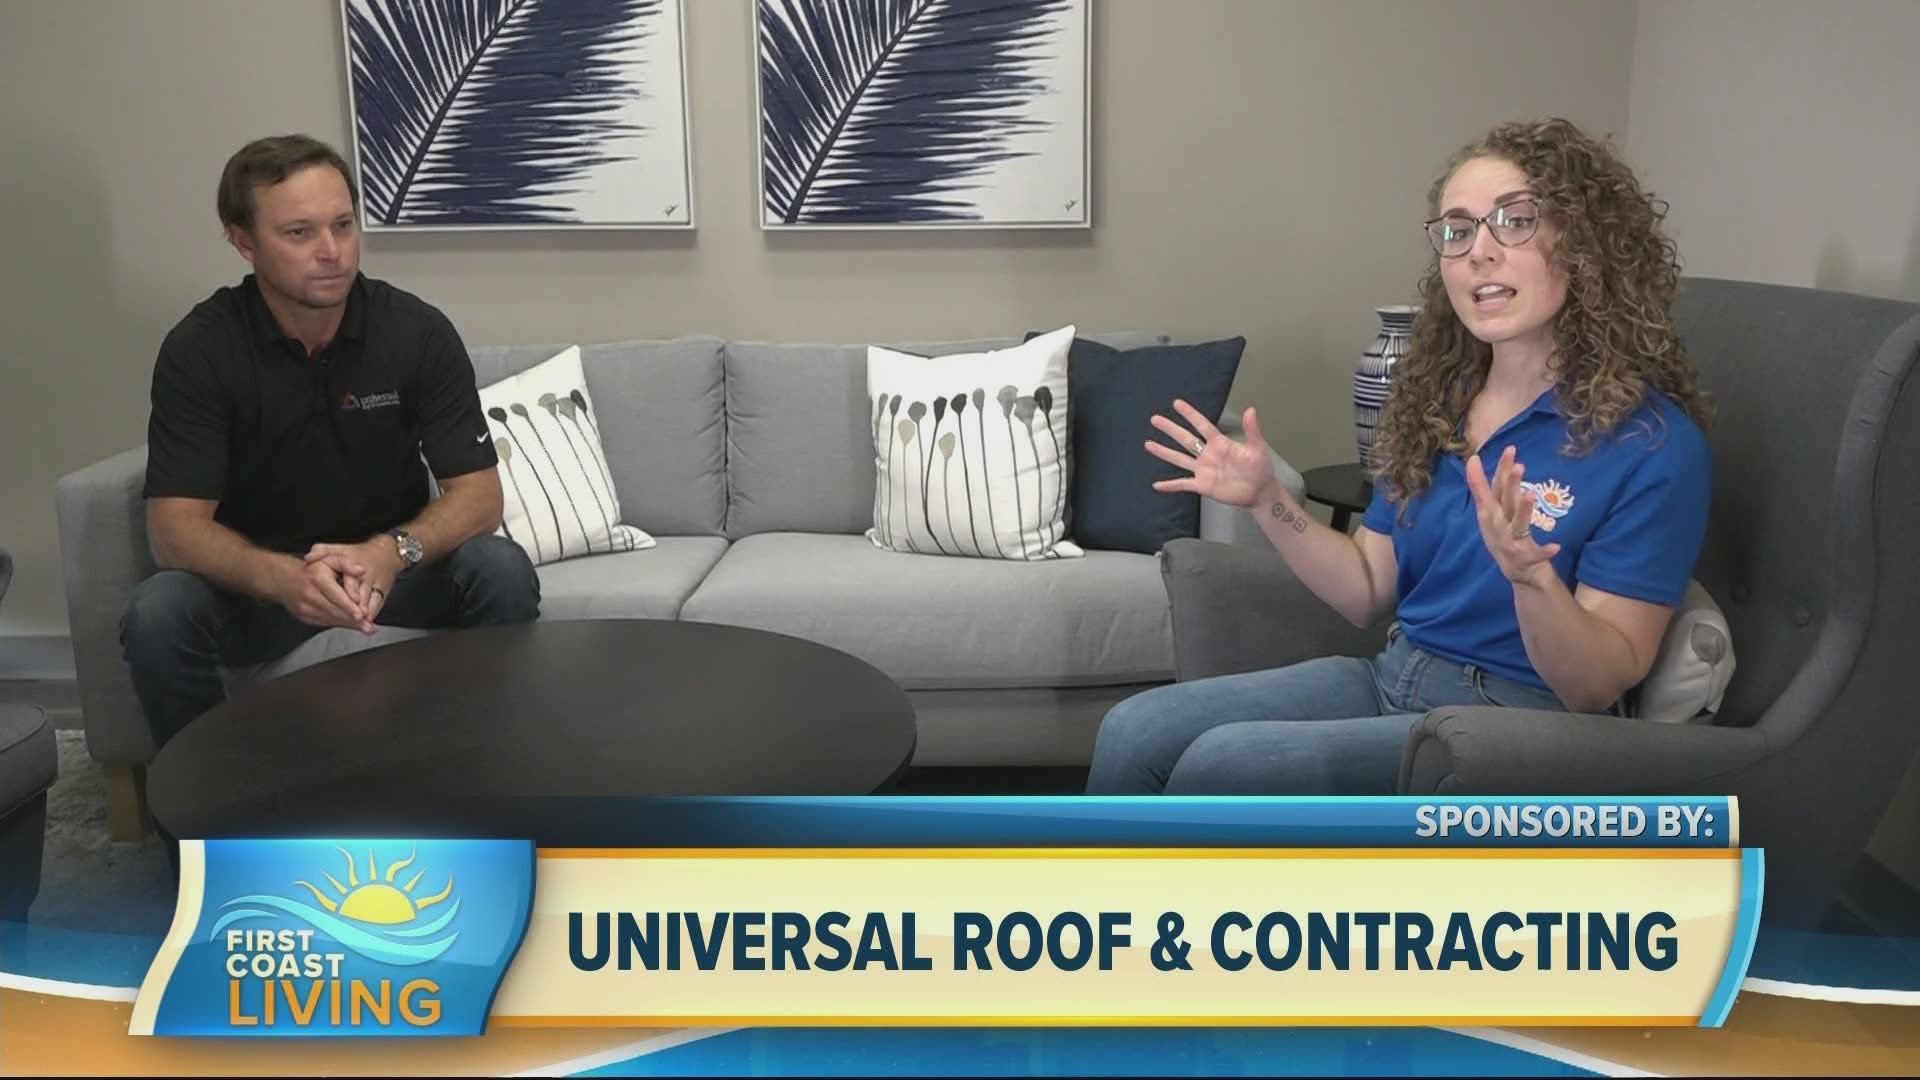 Universal Roof and Contracting has your back (or your roof) when it comes to home protection.